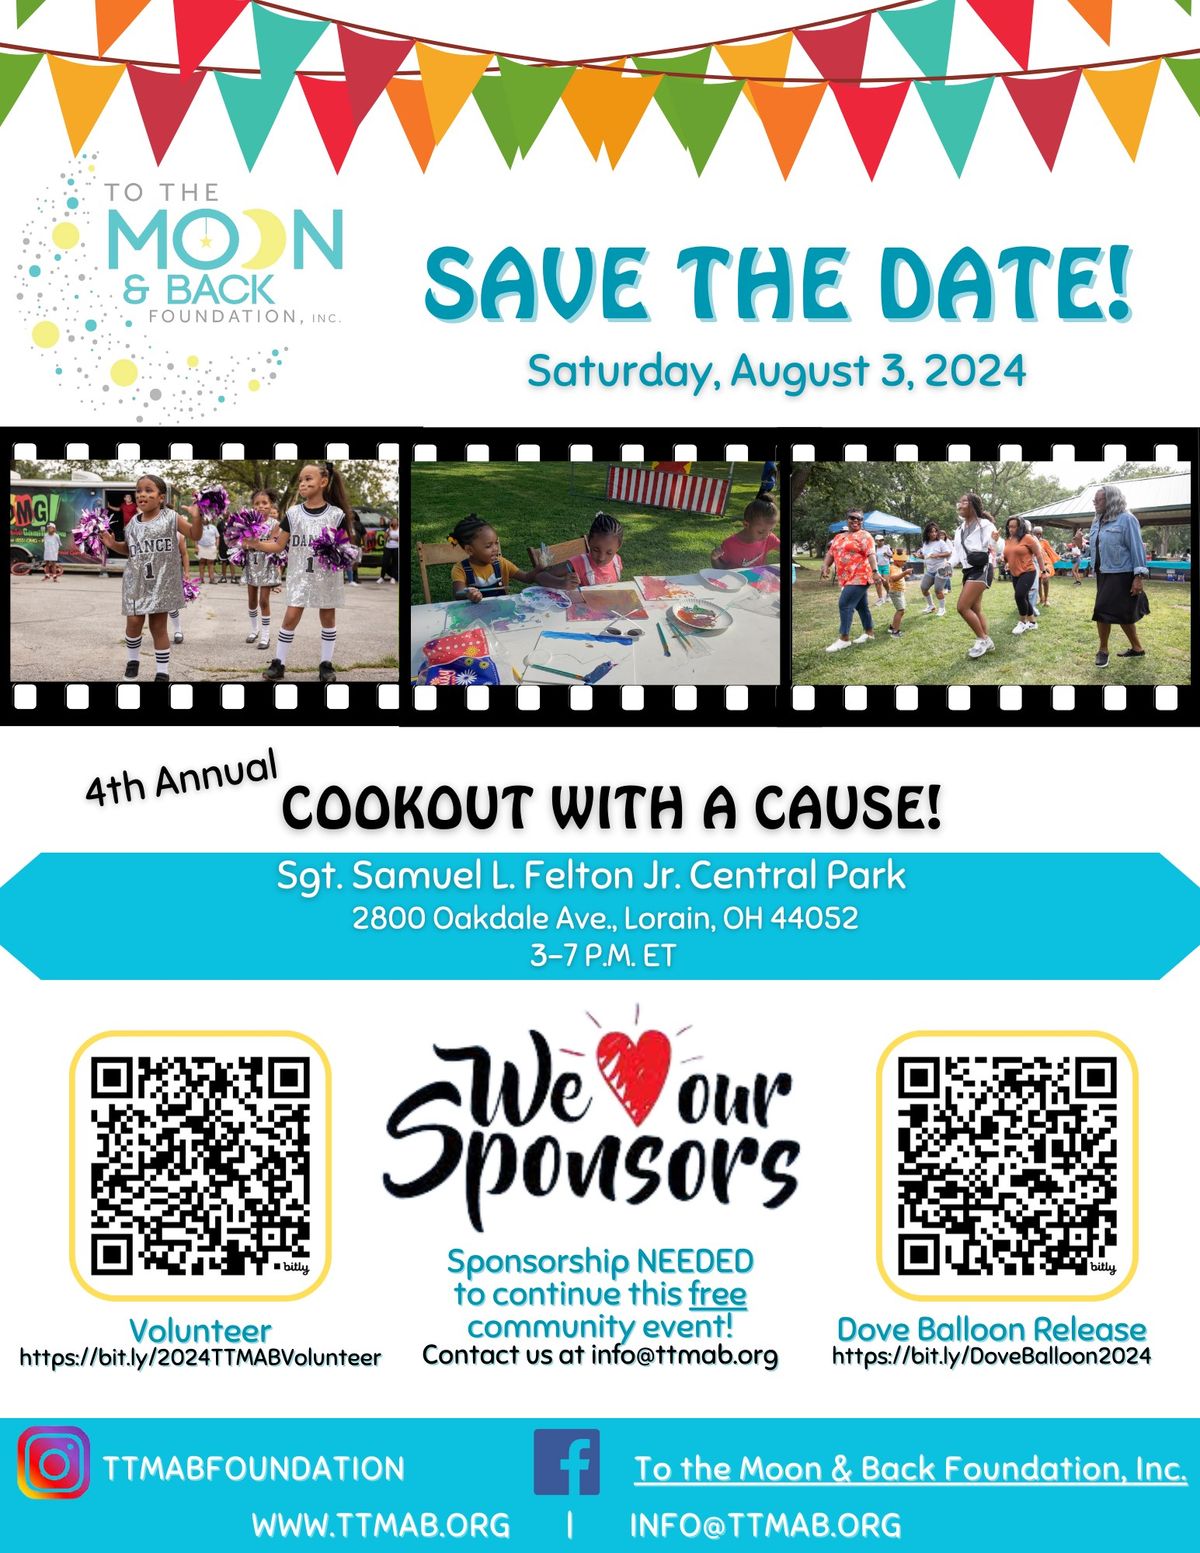 4th Annual Cookout with a Cause!